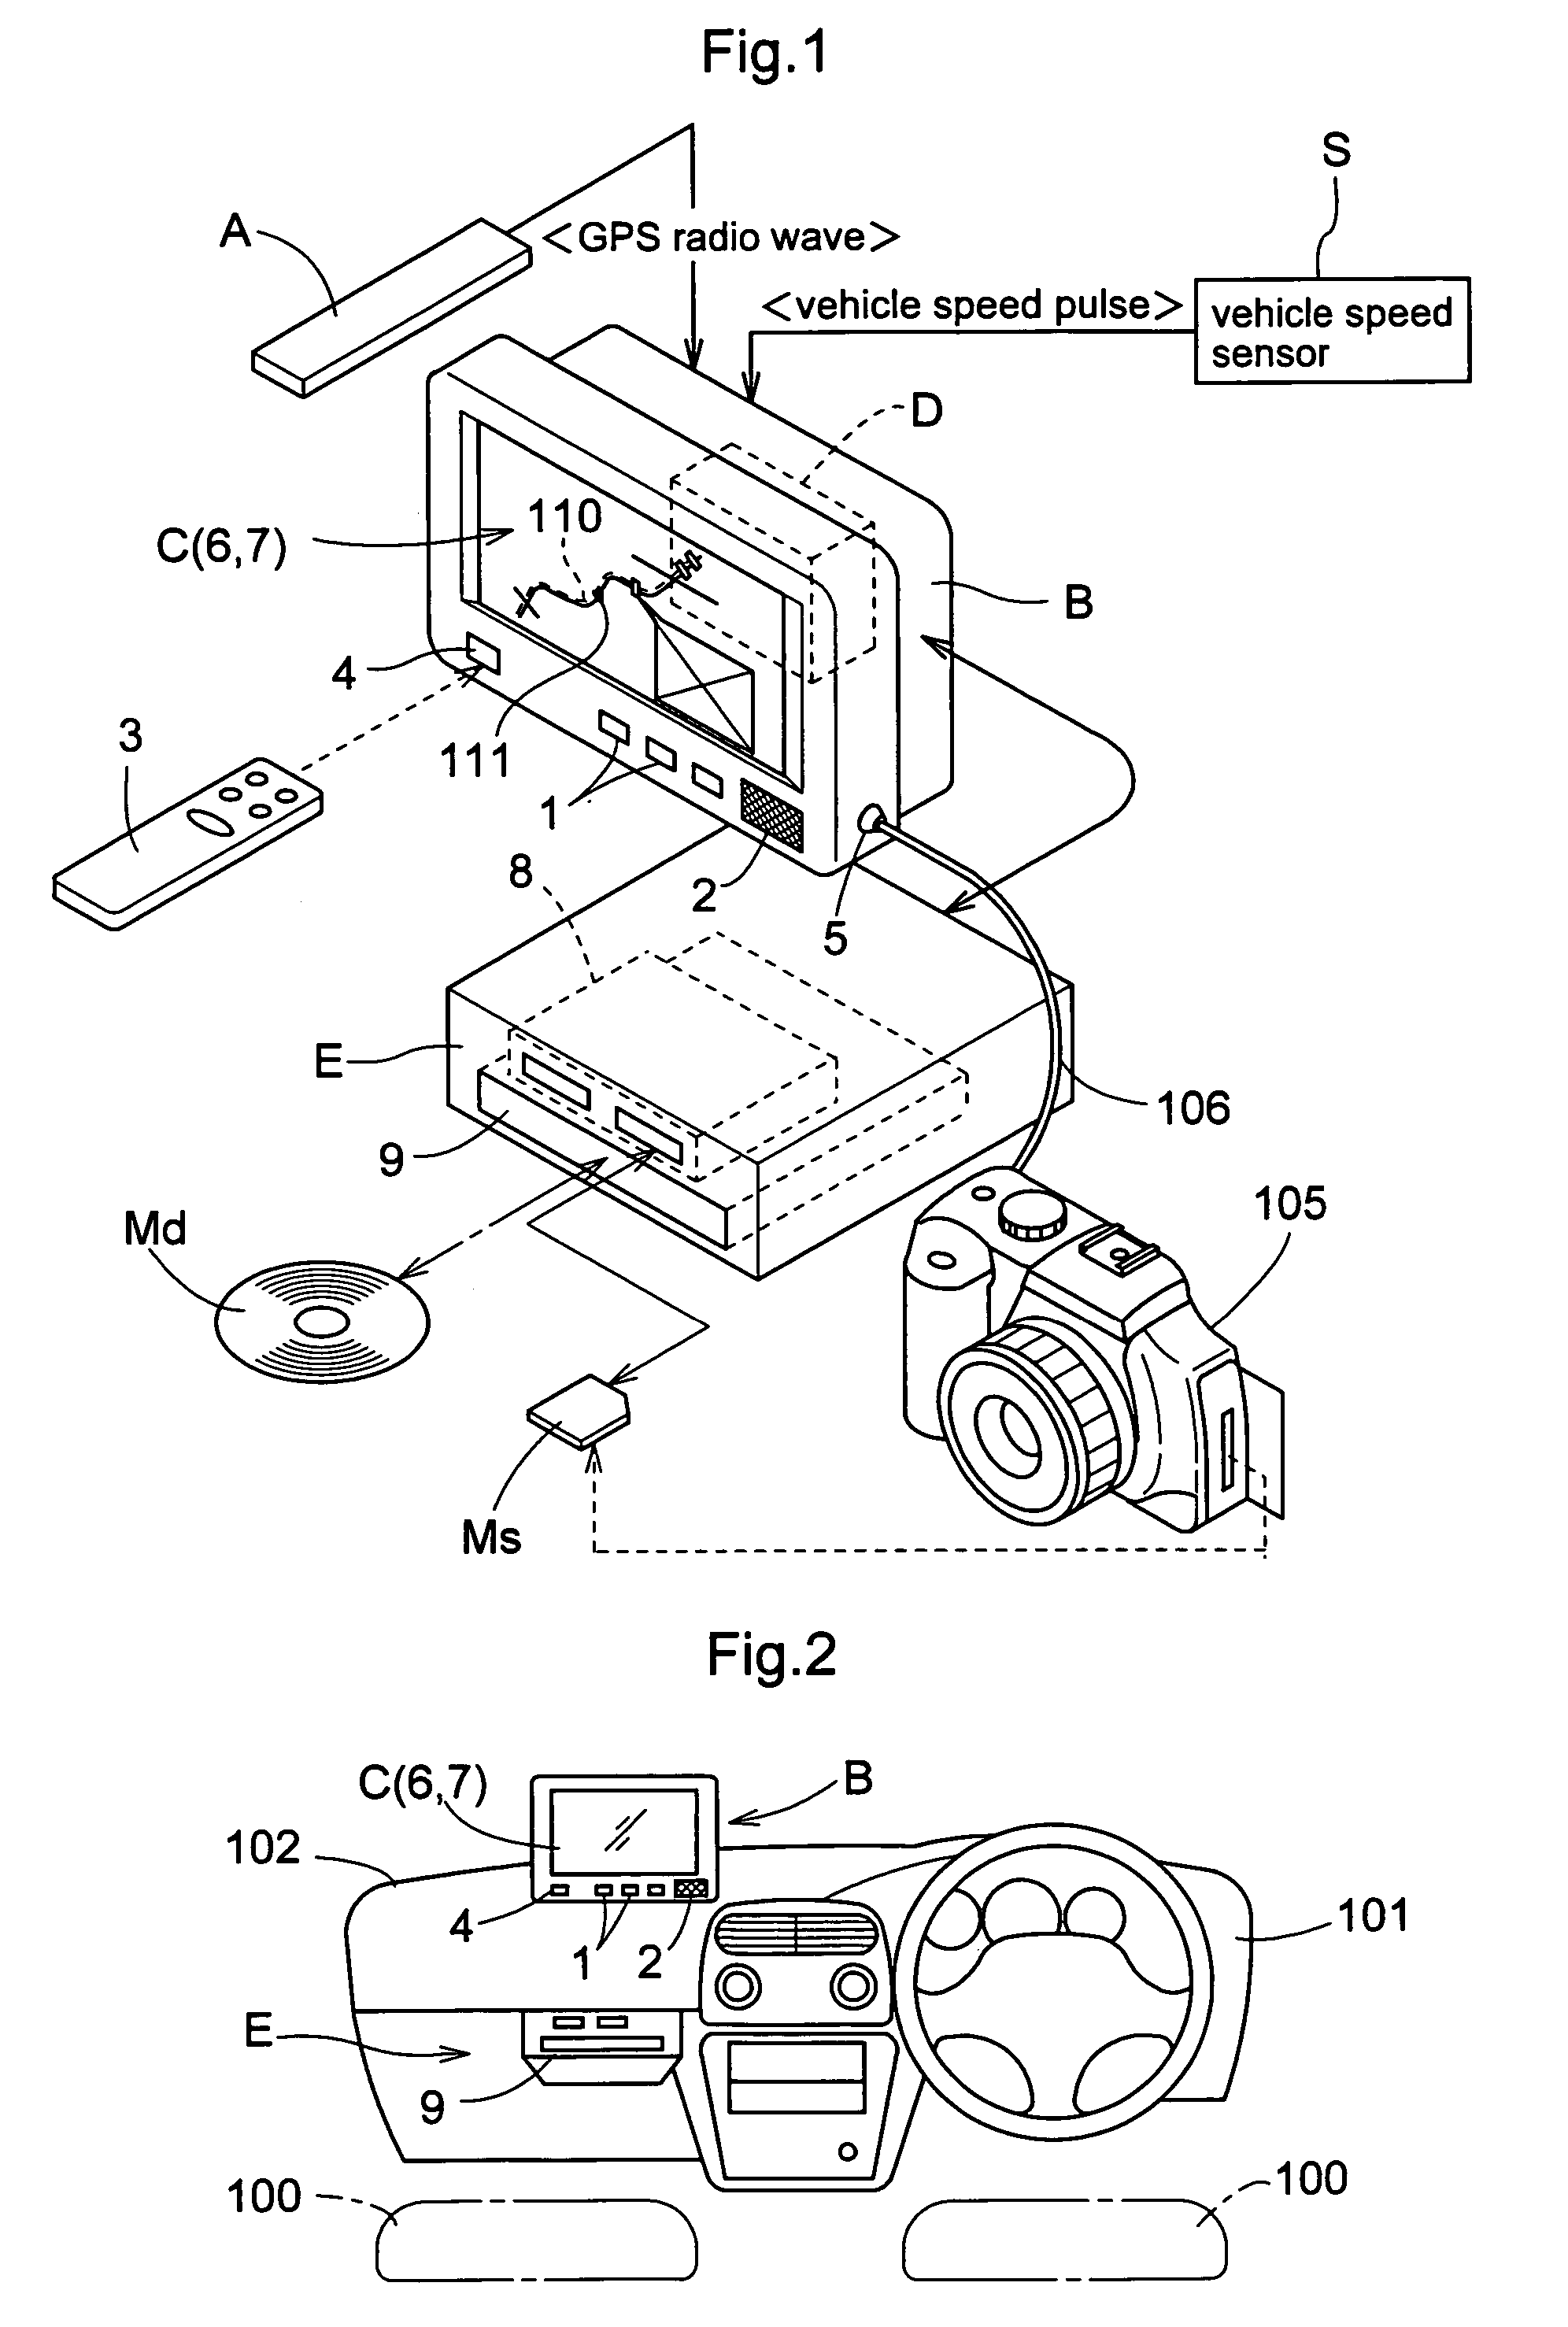 Image processing system, method and apparatus for correlating position data with image data